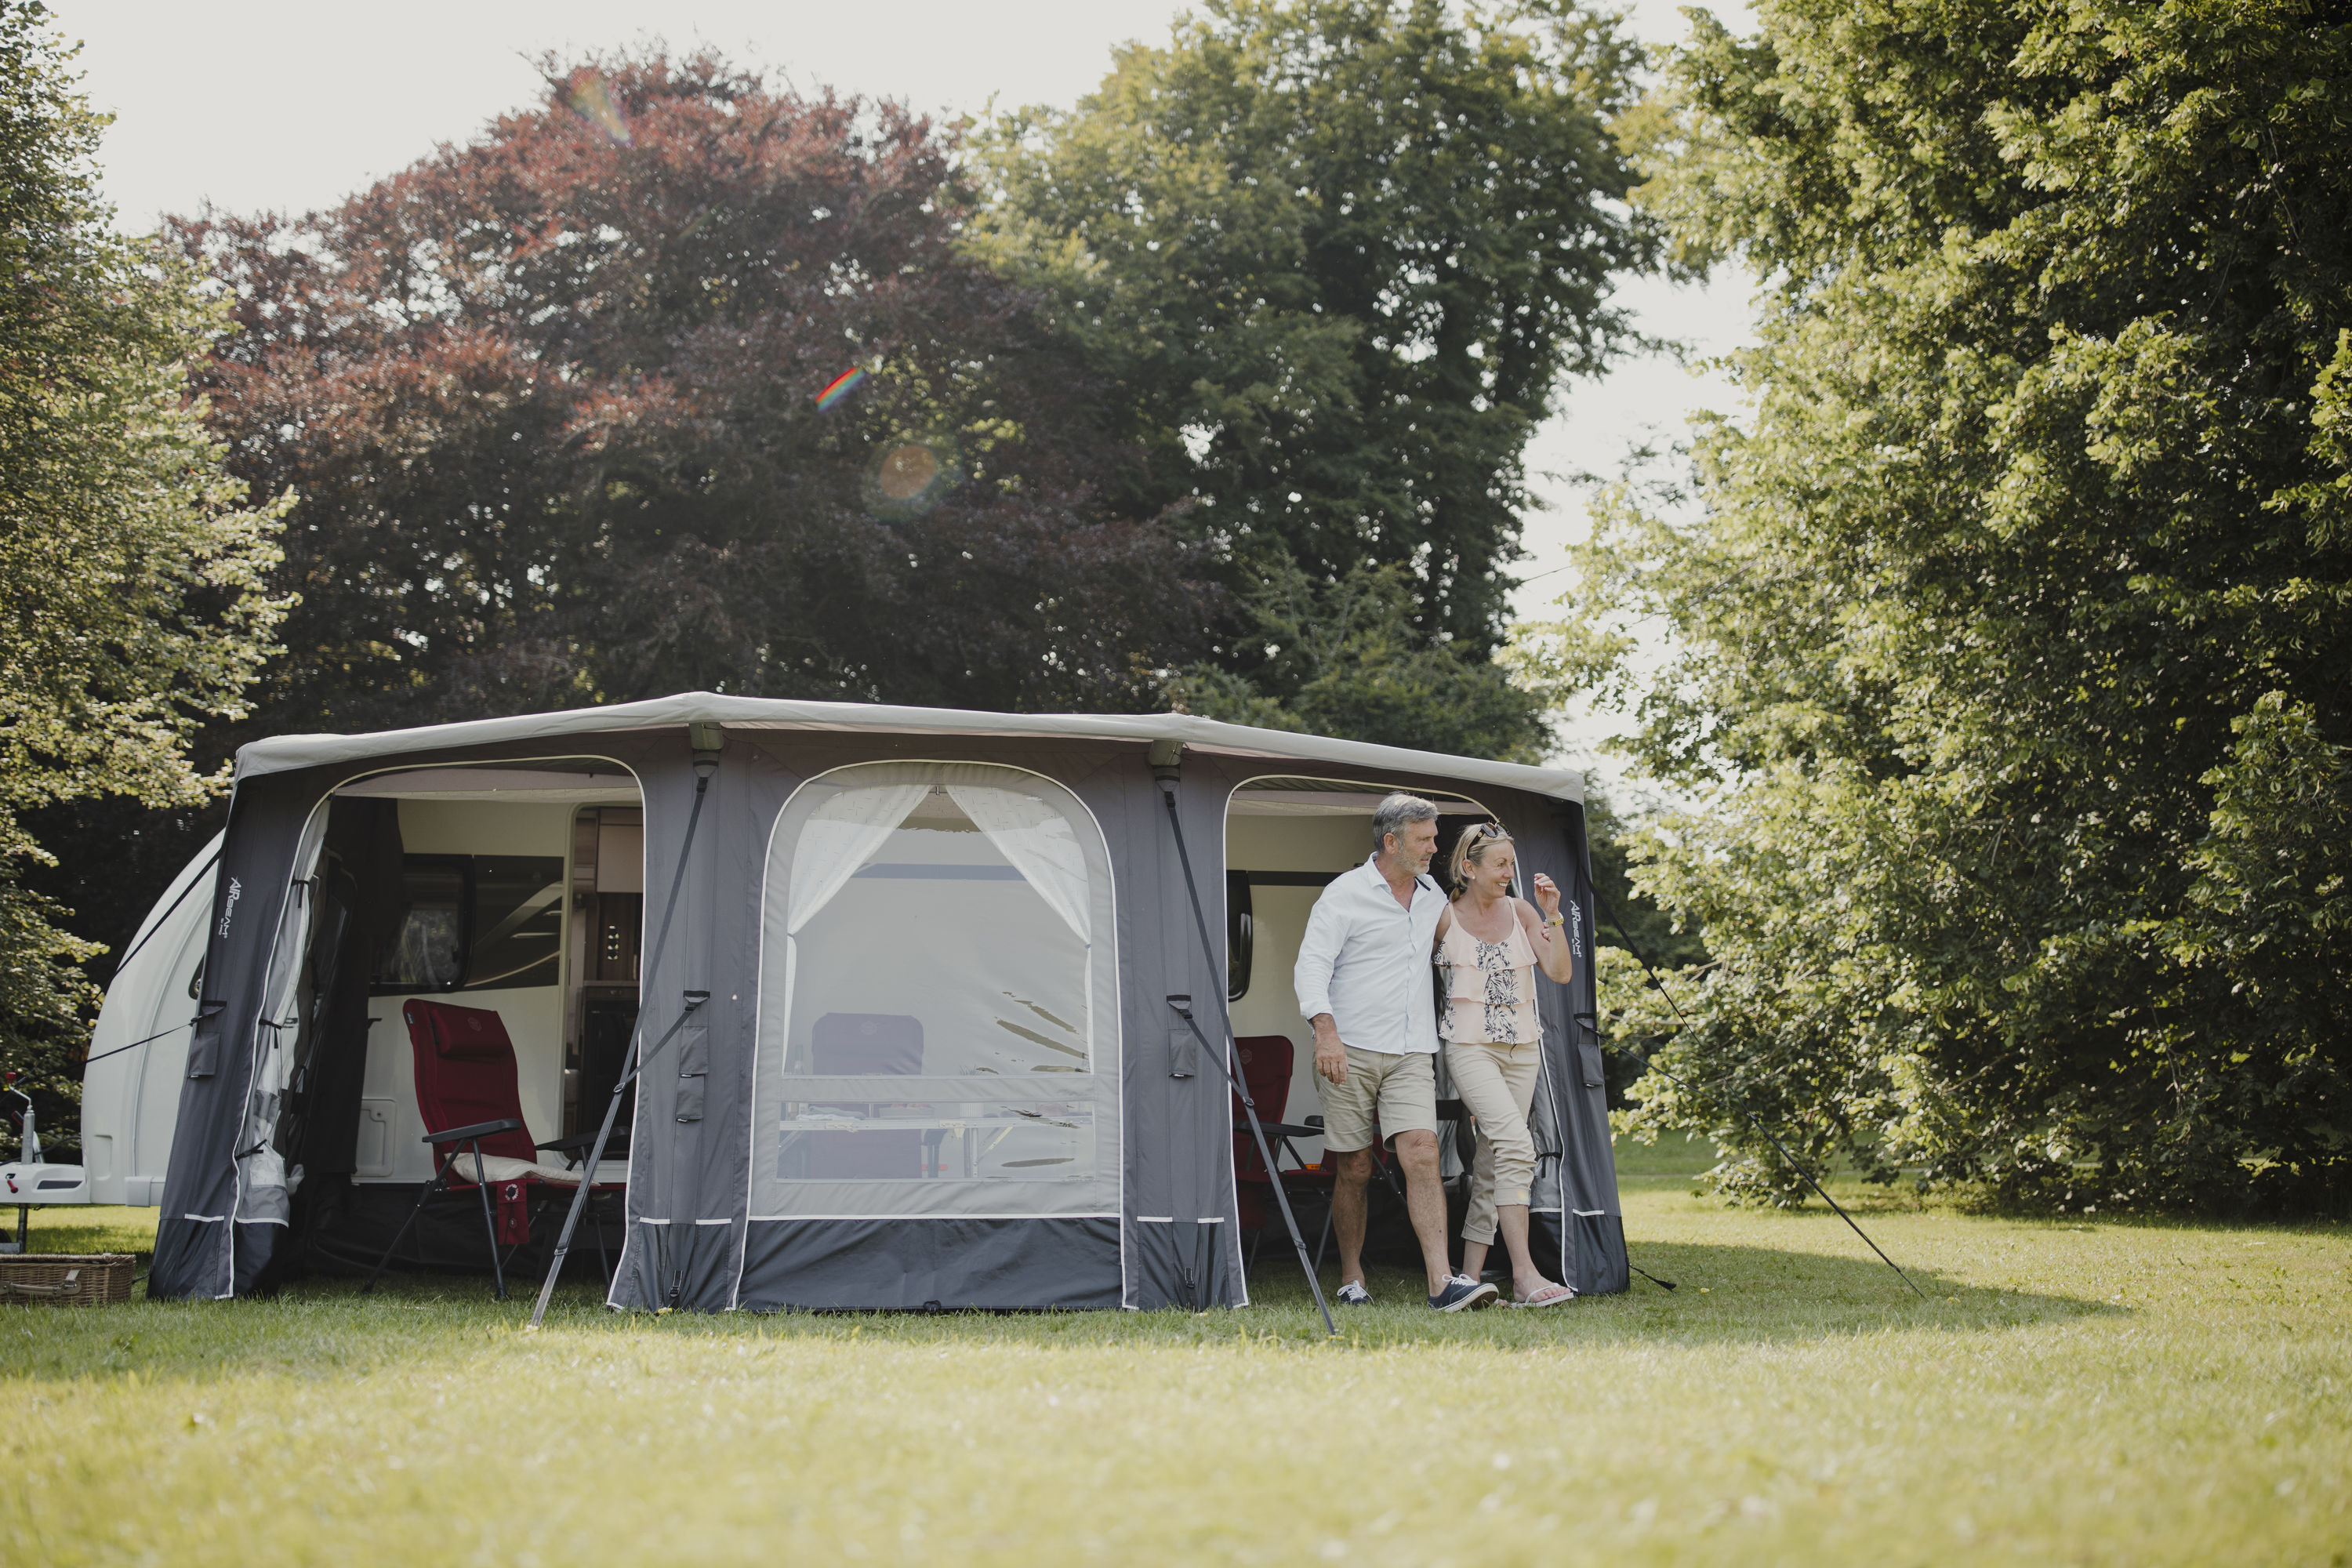 All the facts you need to know about the fabulous Vango Tuscany Air Caravan awning!